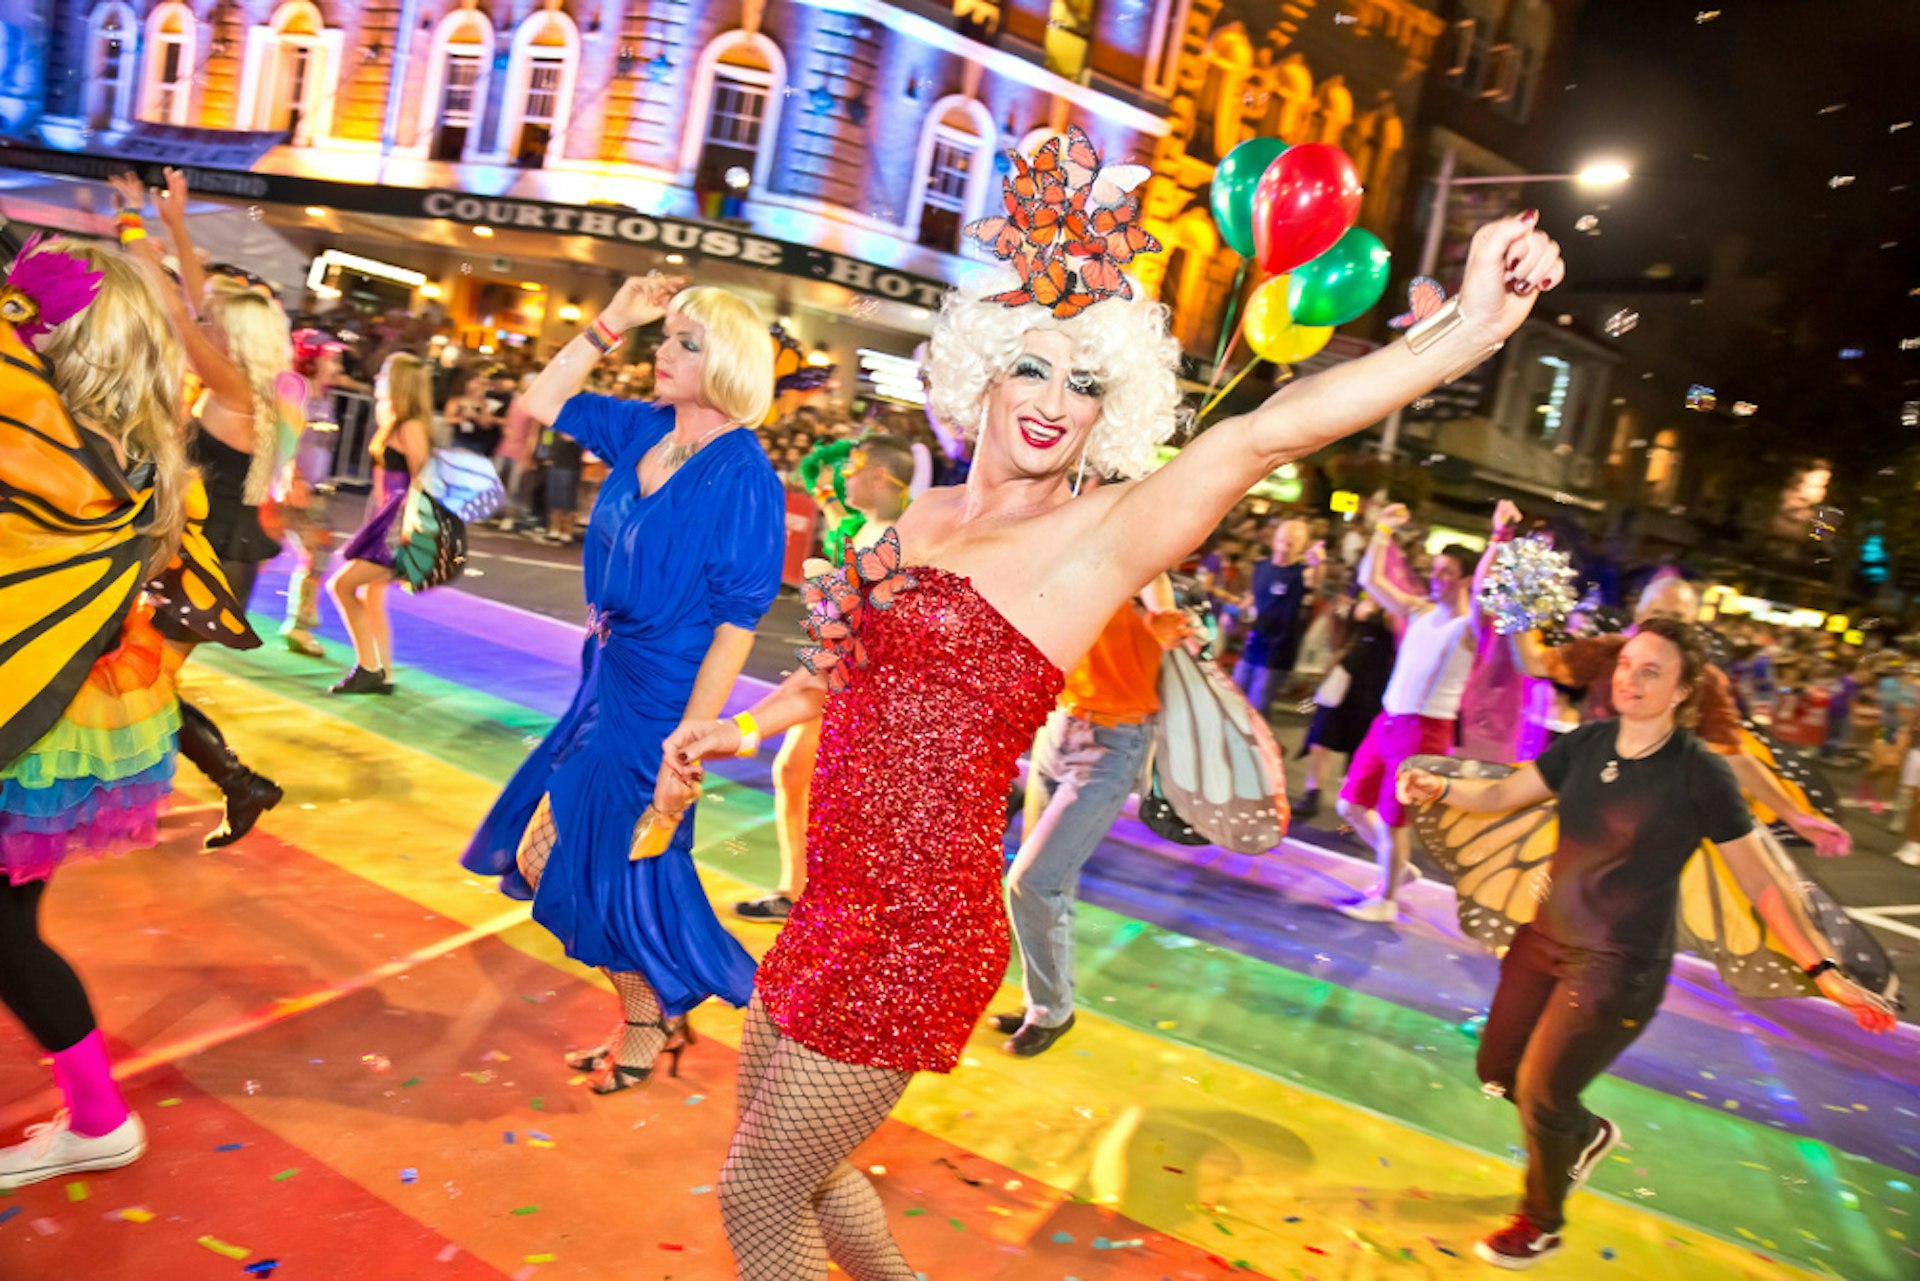 Get your Pride on at the Sydney Mardi Gras Parade. Image by Hamid Mousa / Sydney Gay and Lesbian Mardi Gras